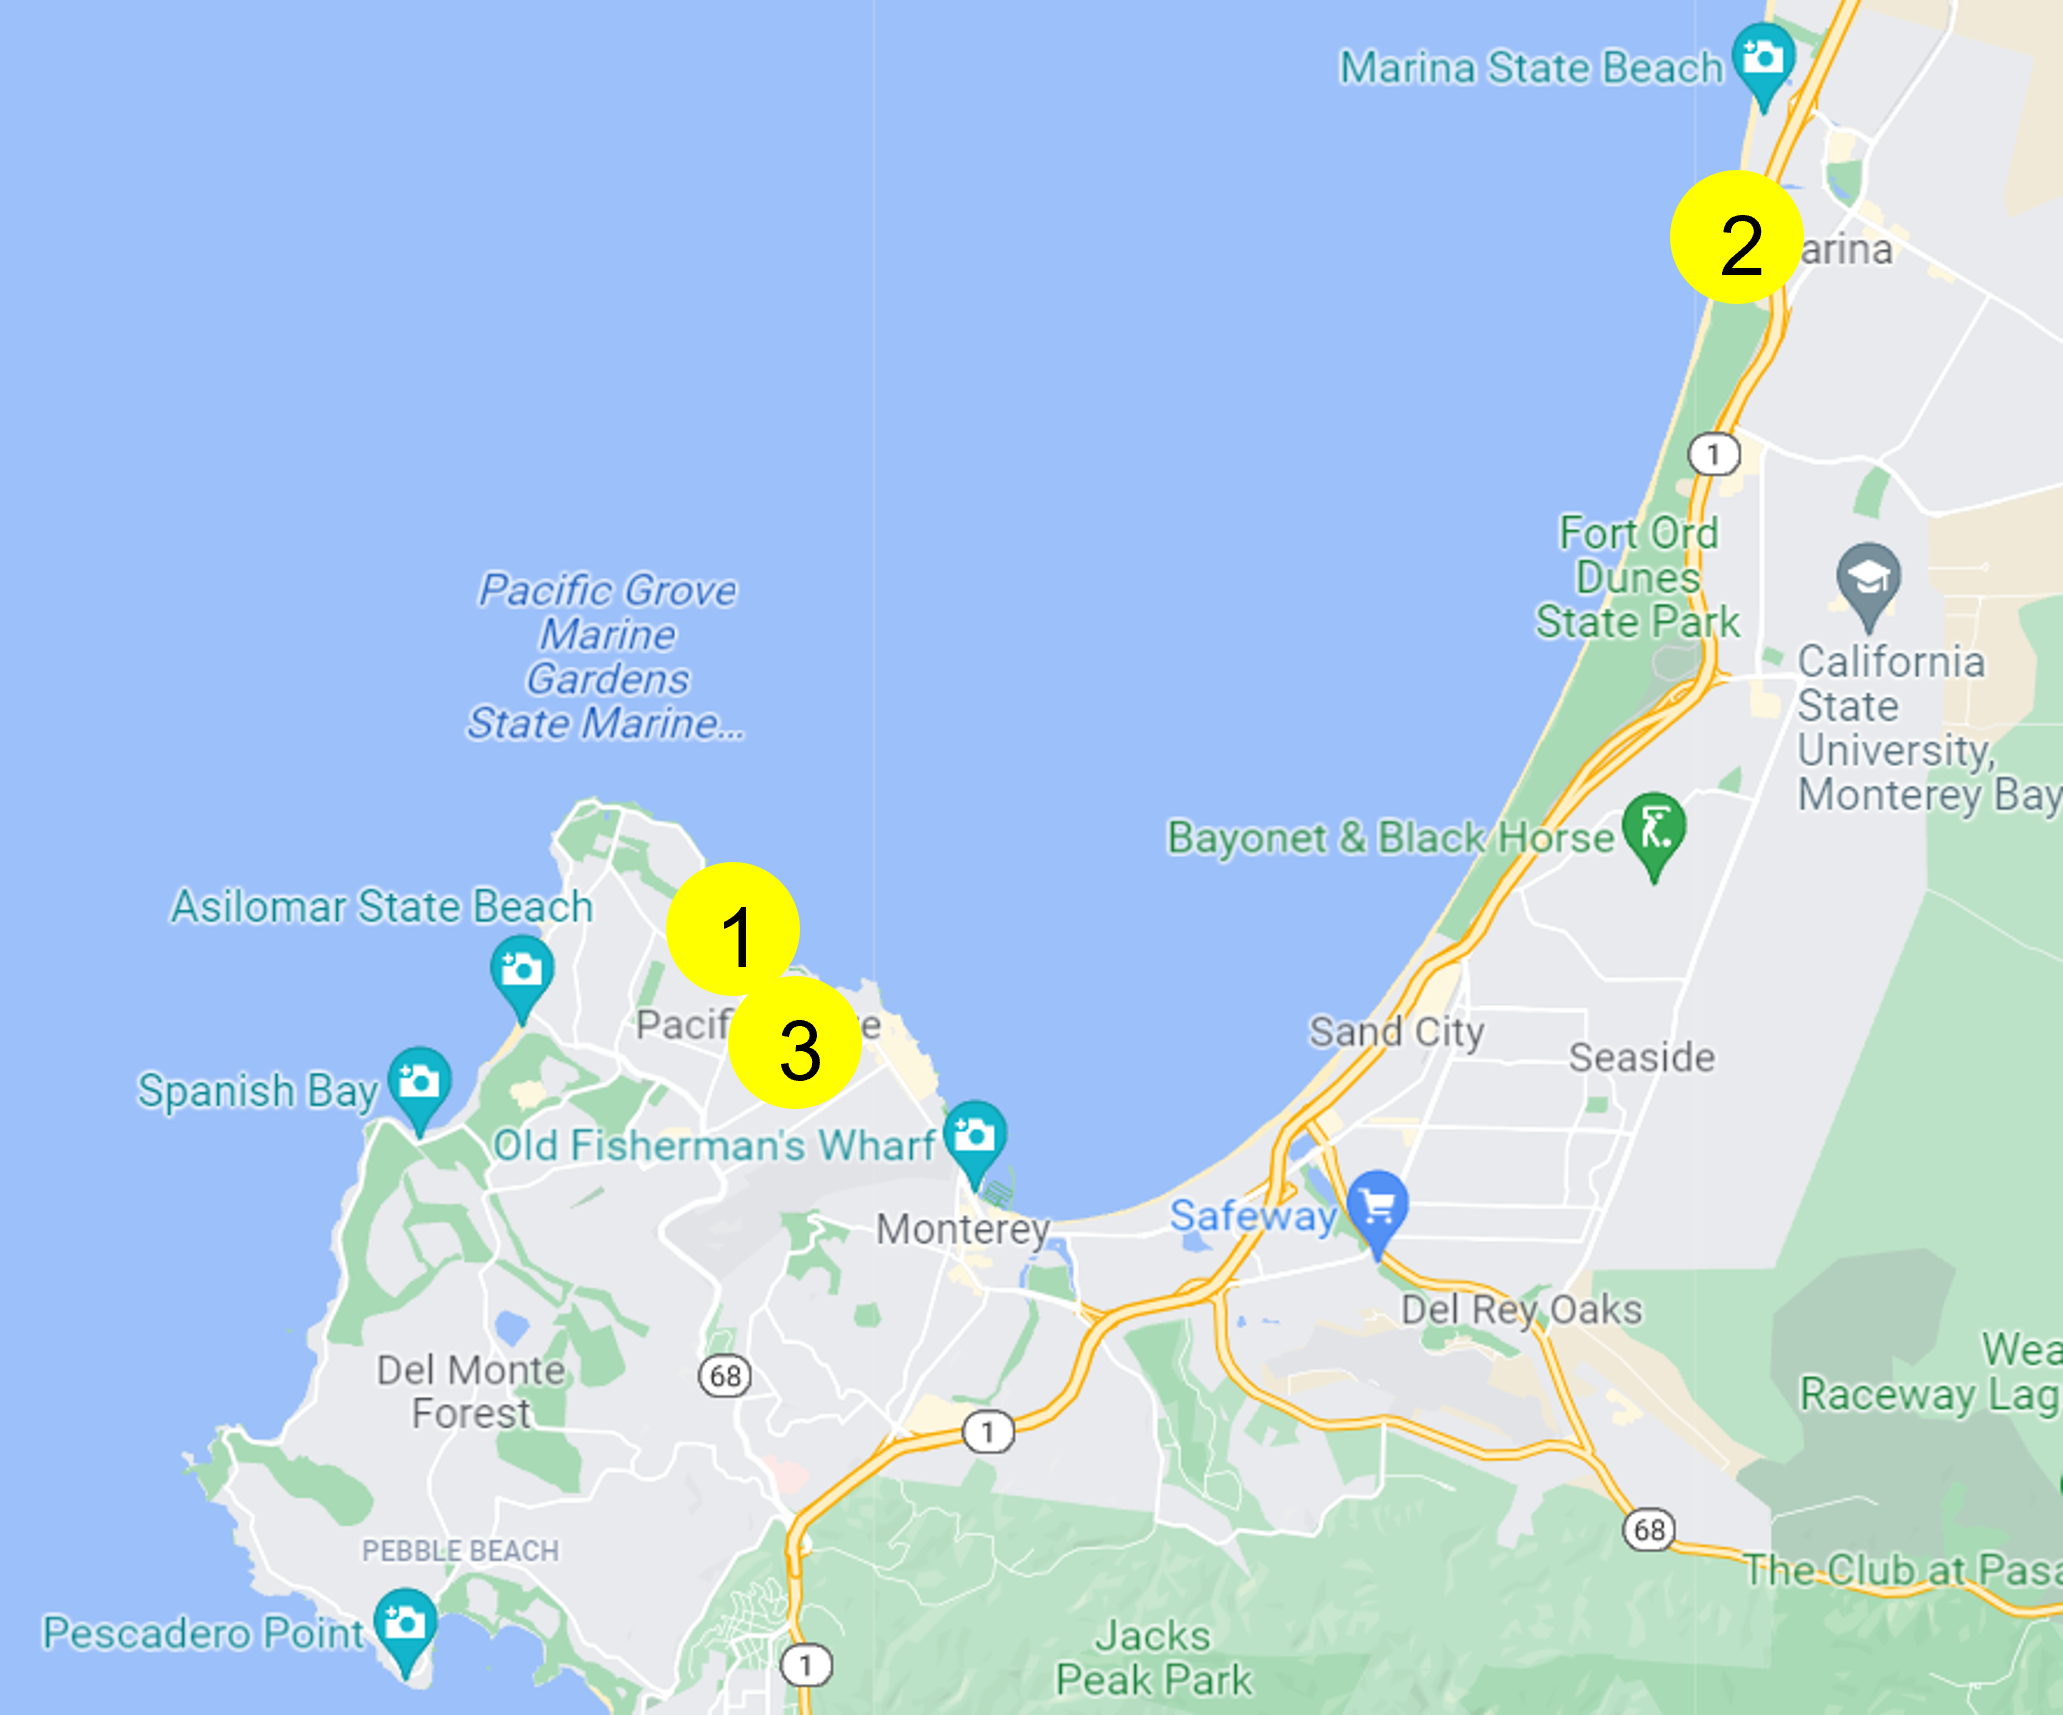 A map of the Monterey Bay area displaying the locations for each Data Silo.